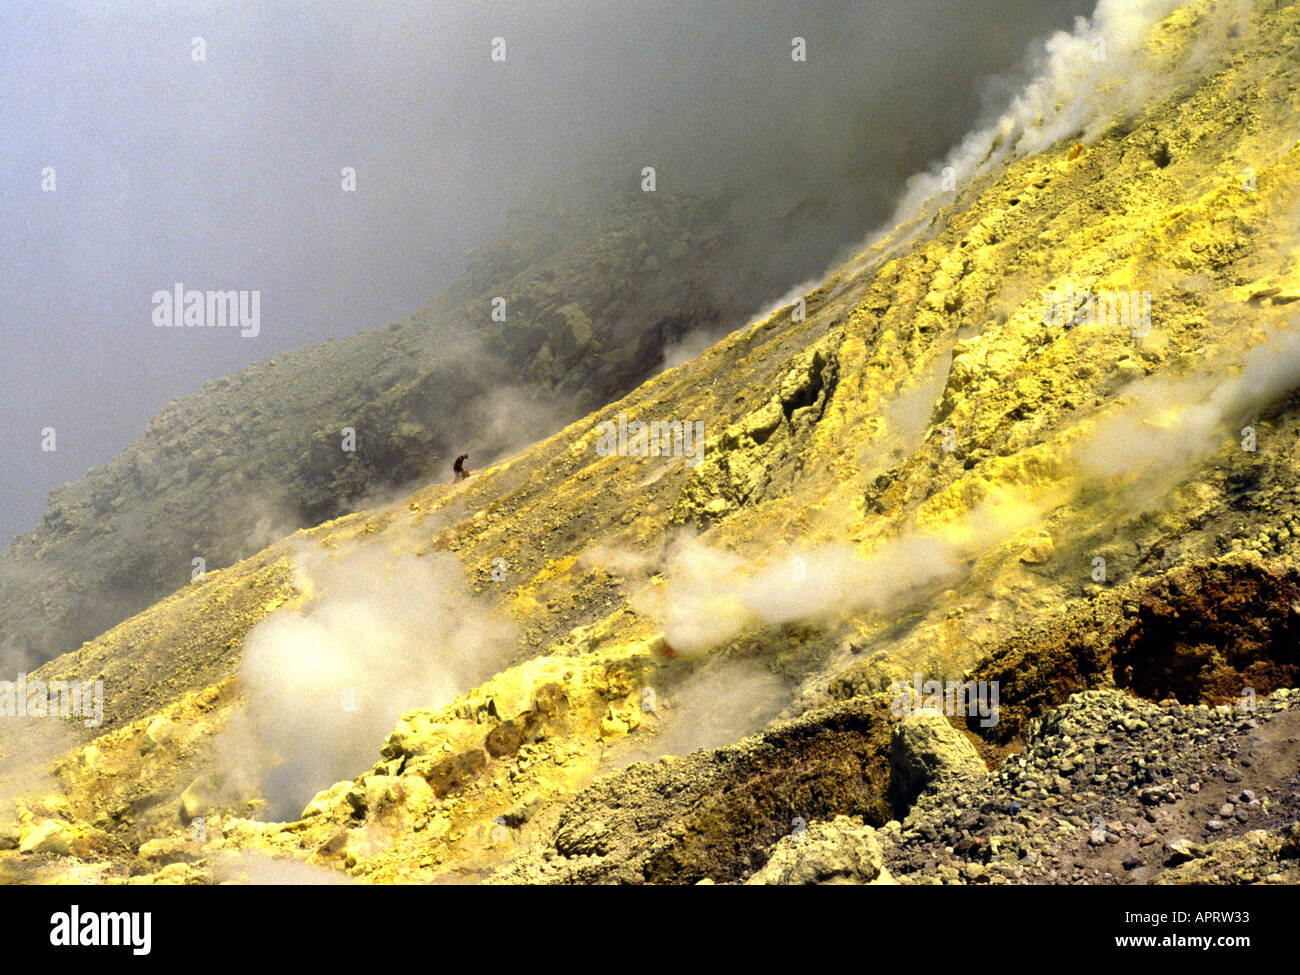 Man collecting sulfur from the side of a volcano, Java, Indonesia Stock Photo